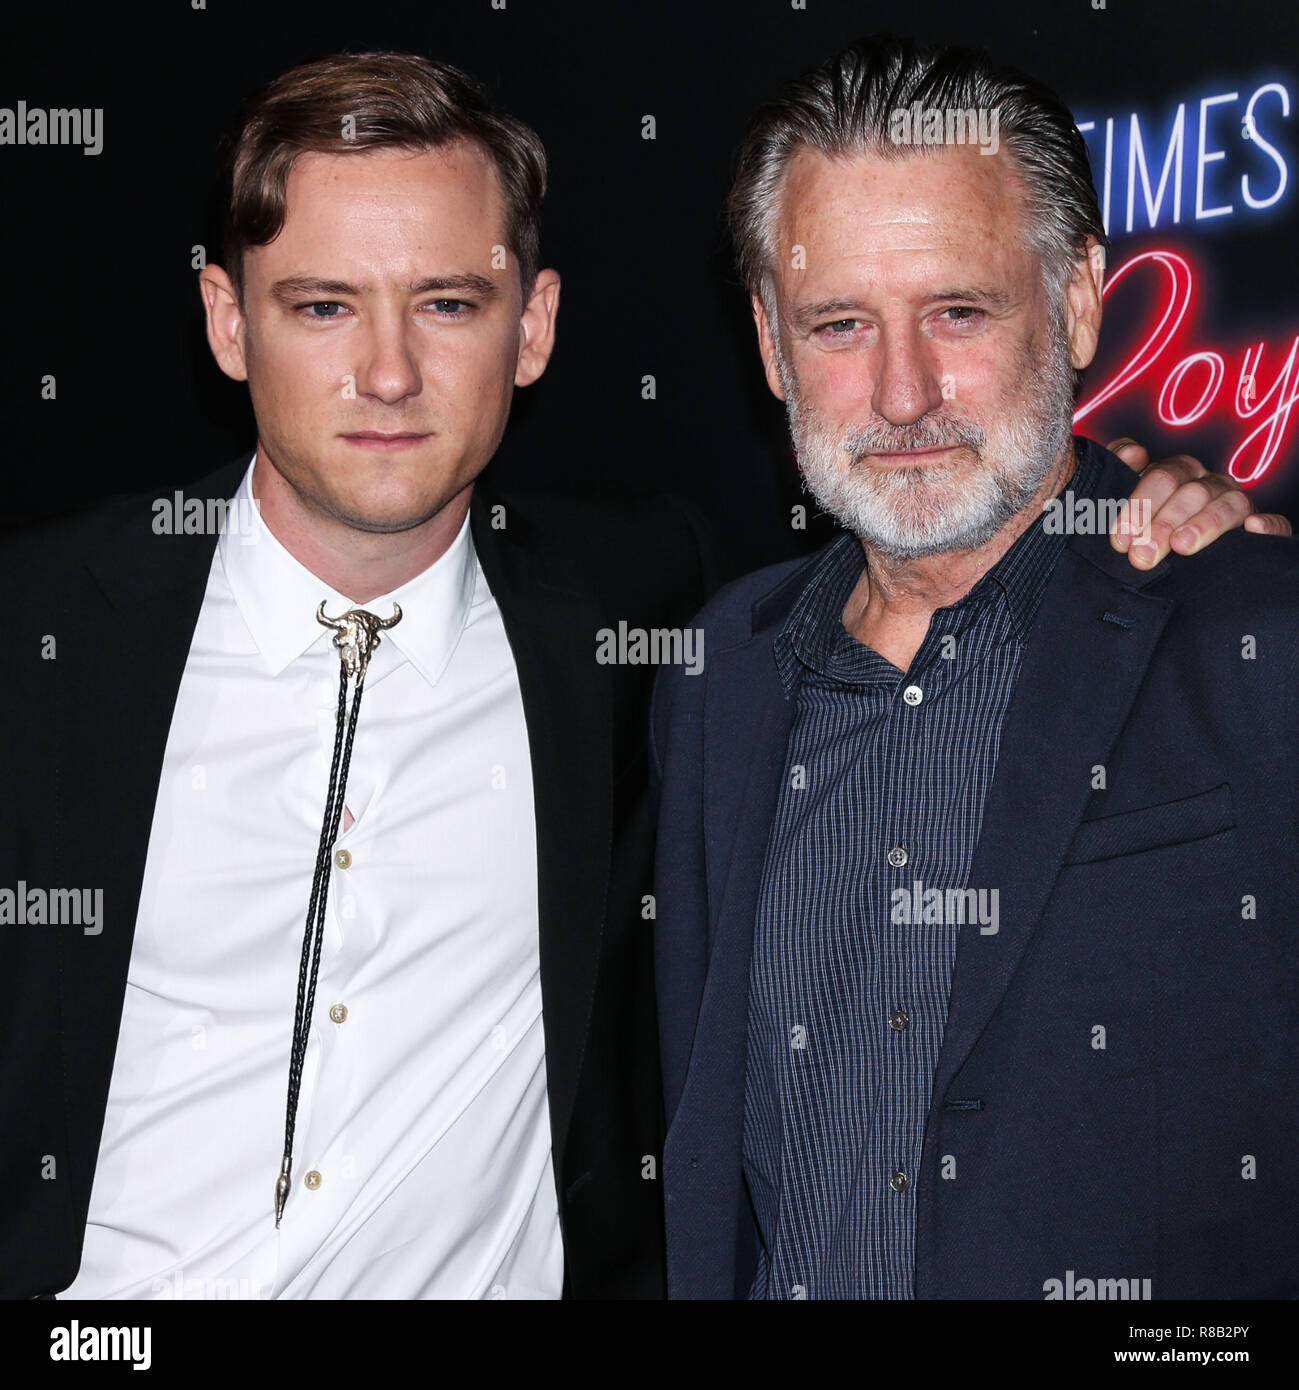 Hollywood Los Angeles Ca Usa September 22 Lewis Pullman Bill Pullman At The Los Angeles Premiere Of th Century Fox S Bad Times At The El Royale Held At The Tcl Chinese